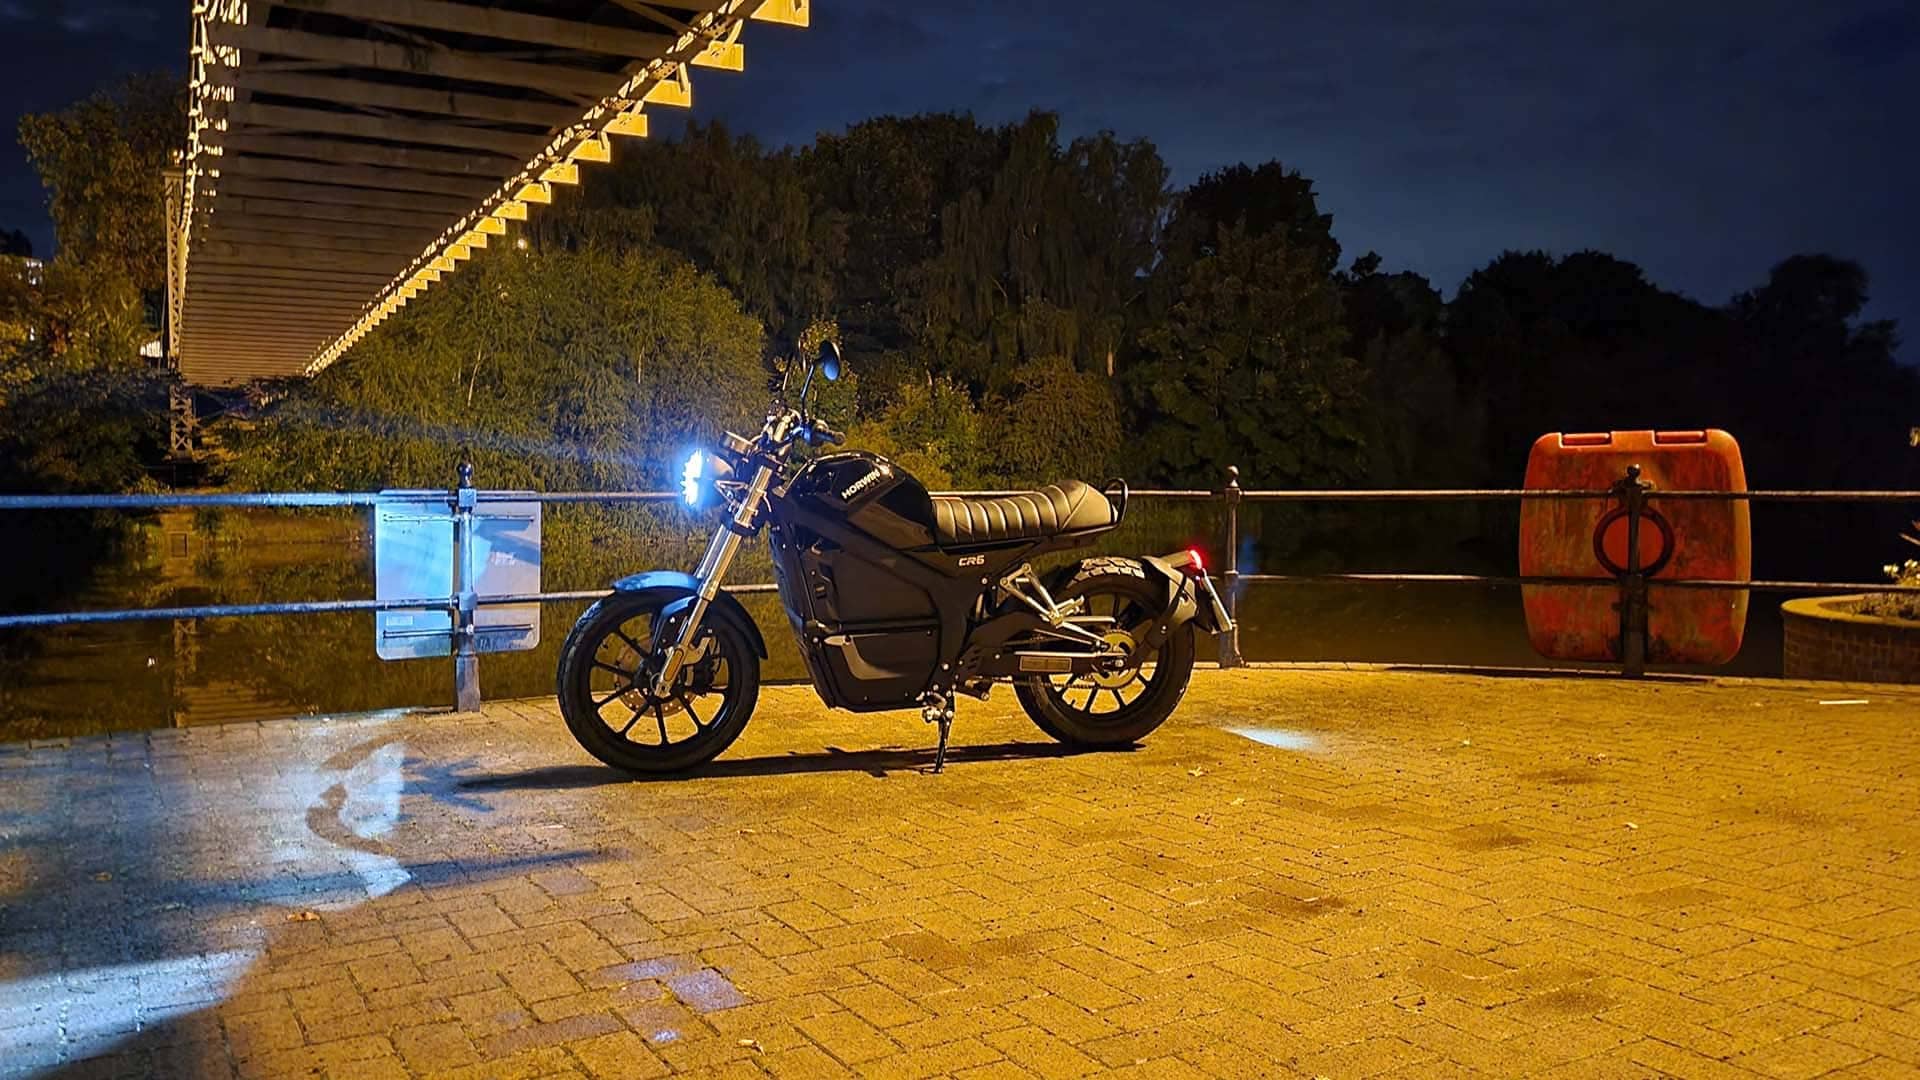 Horwin electric motorcycle next to a canal at night